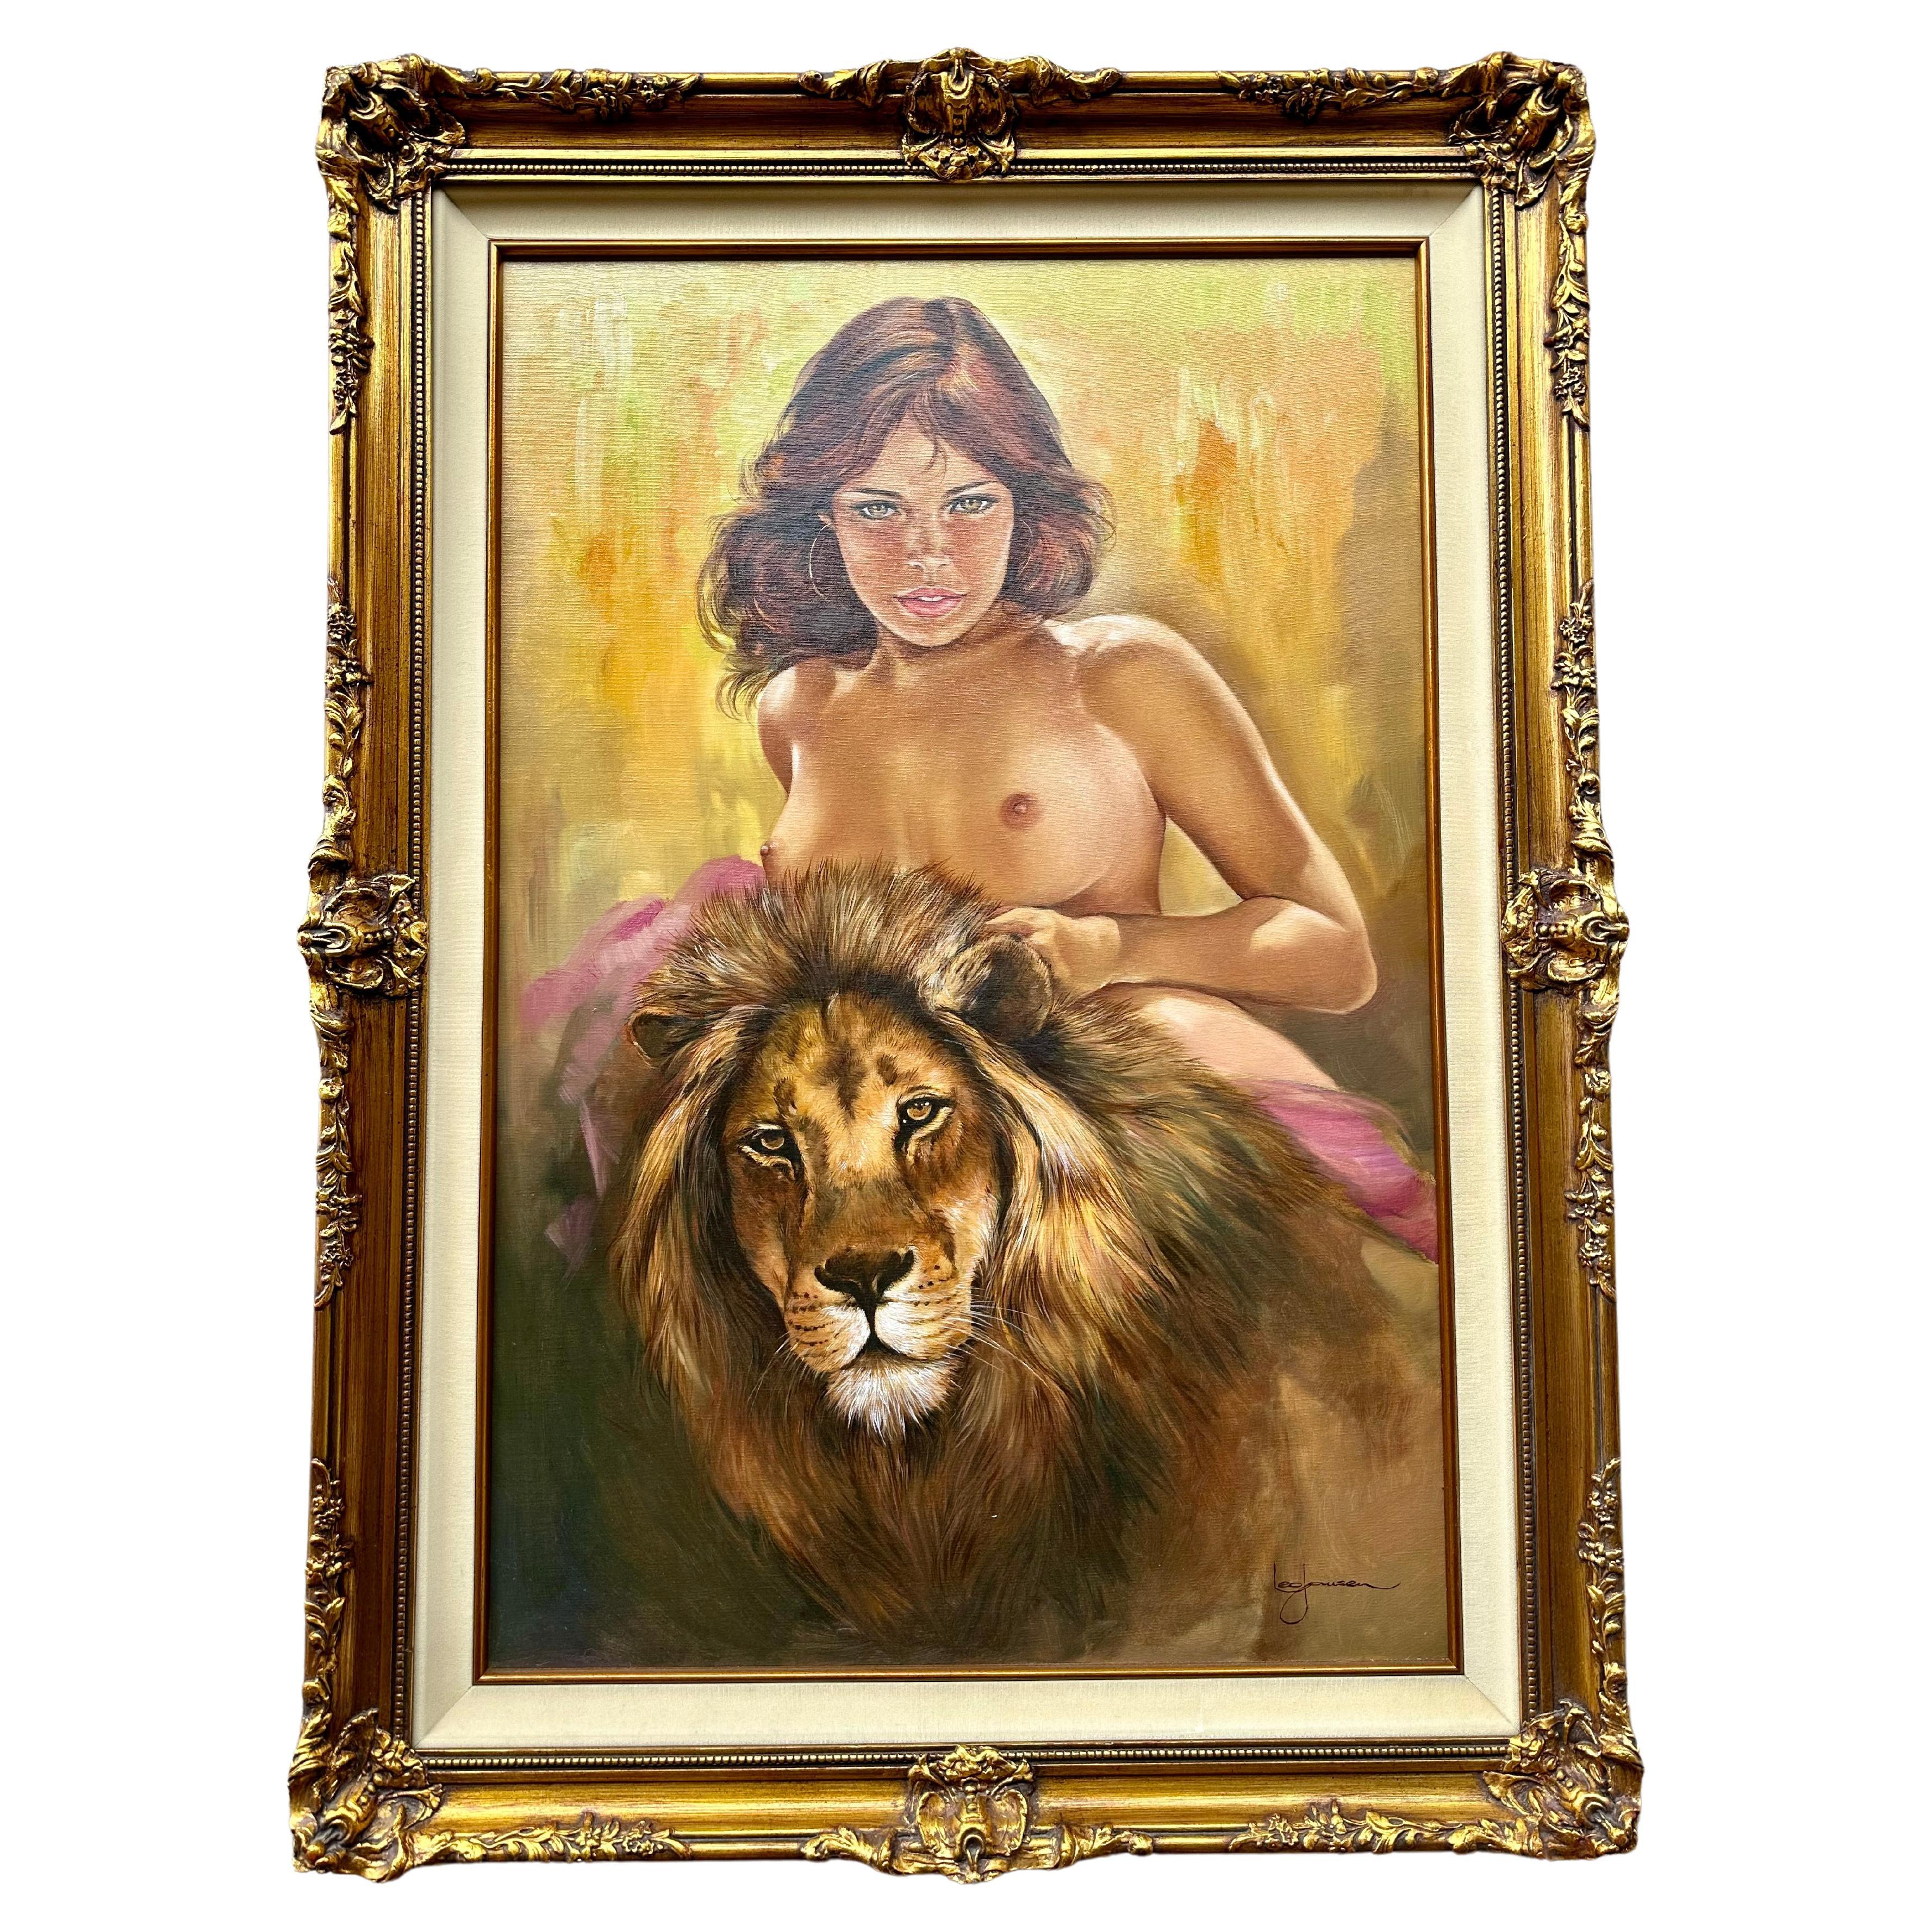 Original Playboy Artist Leo Jansen Oil Painting of a Nude Girl With a Lion 